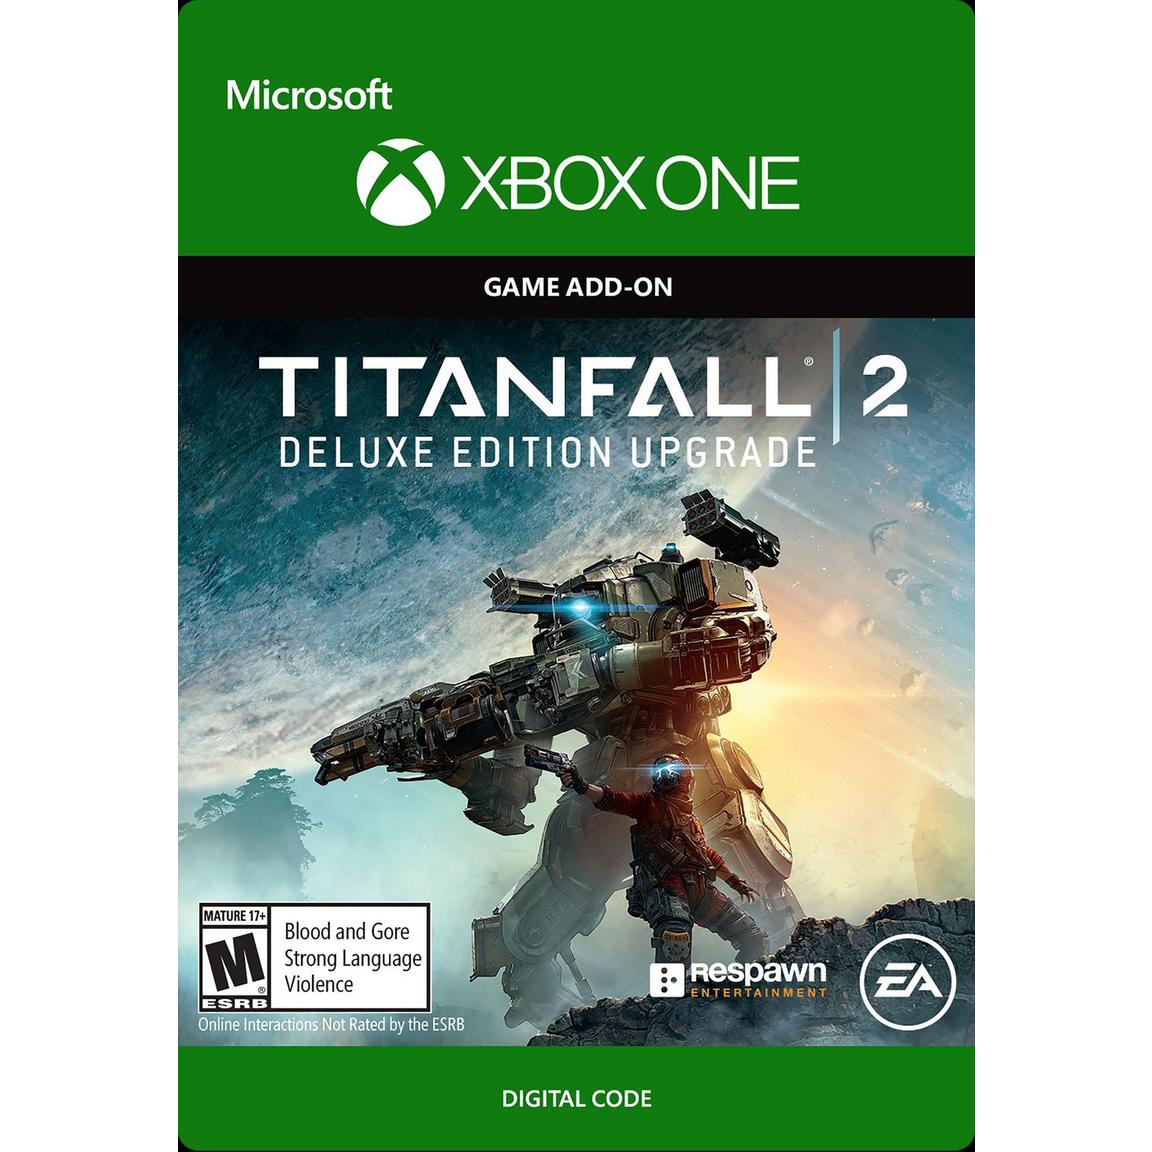 Titanfall 2 Deluxe Upgrade DLC - Xbox one, Digital -  Electronic Arts, 7D4-00137